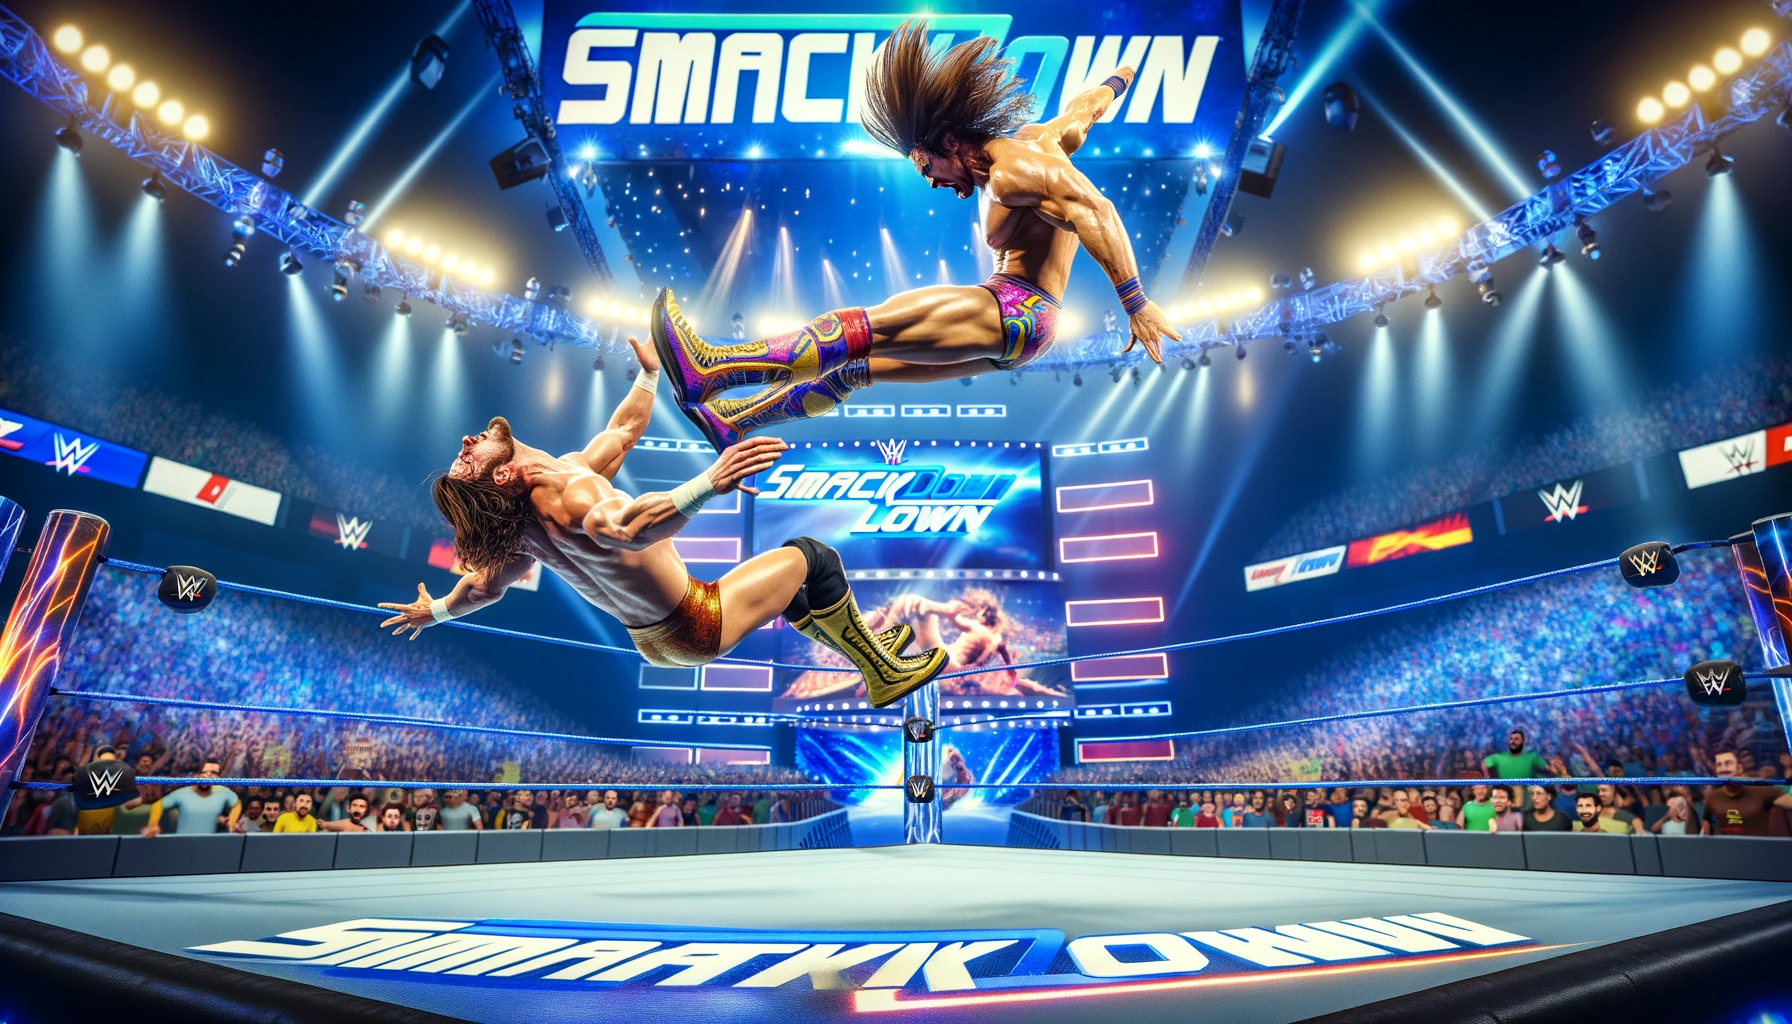 Wrestlers facing off in the ring during WWE SmackDown Episode 1450.